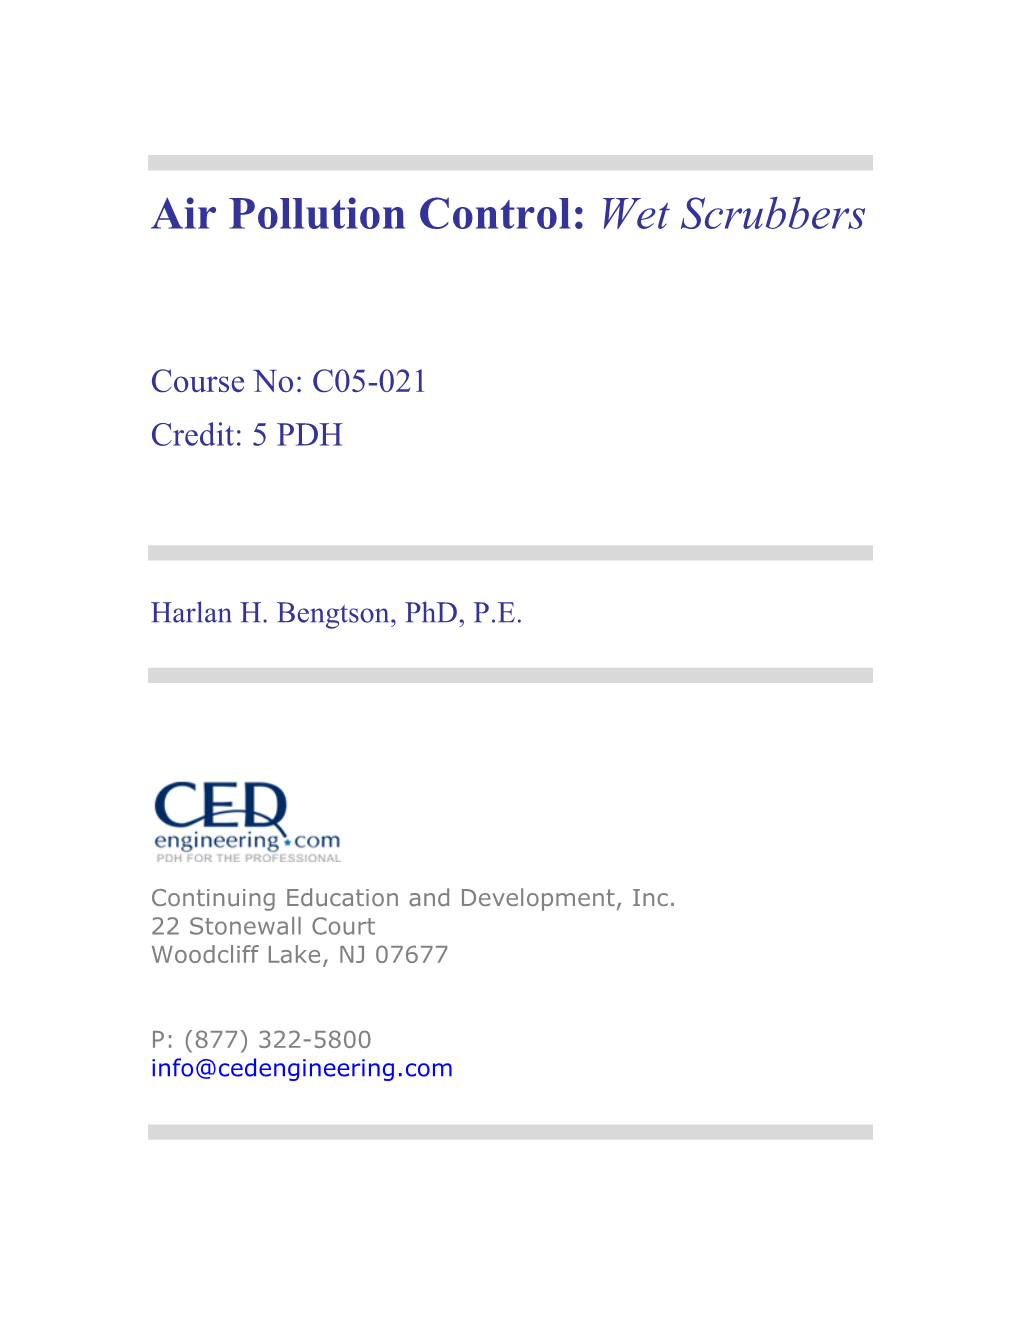 Air Pollution Control: Wet Scrubbers